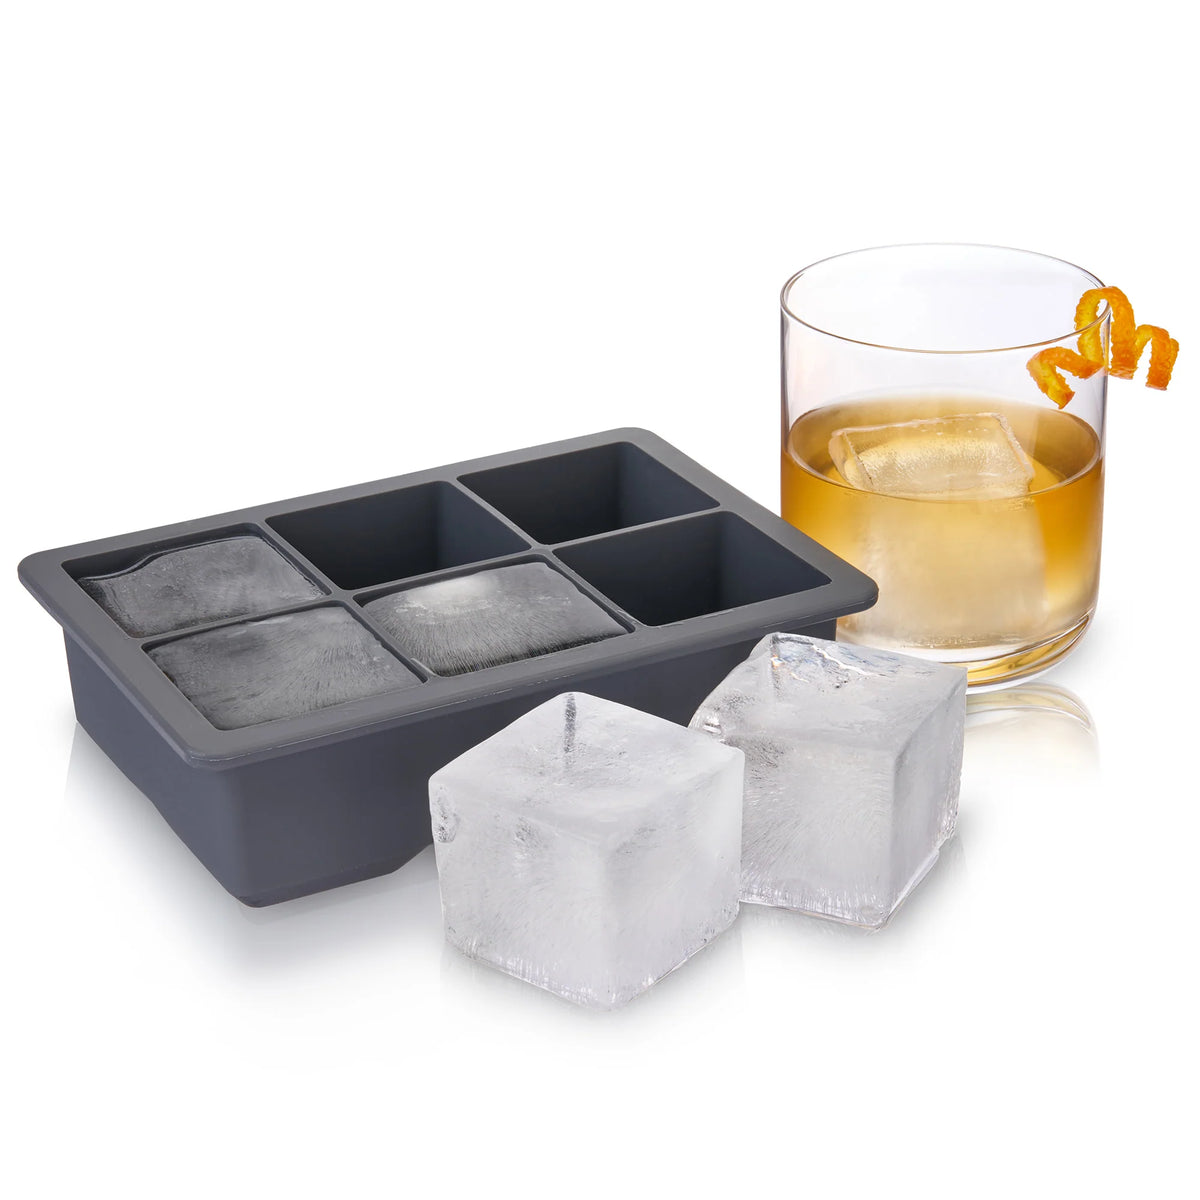 2" Silicone Ice Tray with Lid (makes 6 cubes)